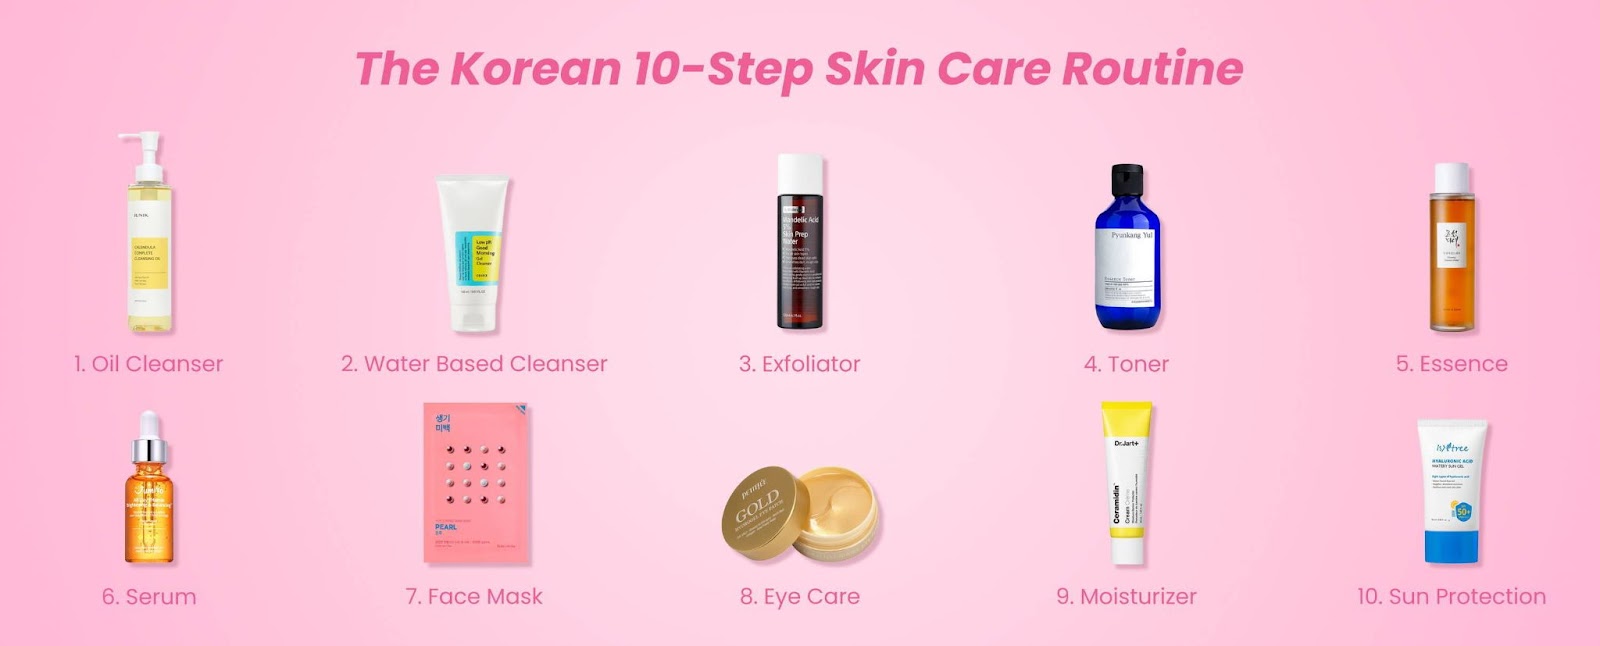 The Korean 10-Step Routine for Dry Skin